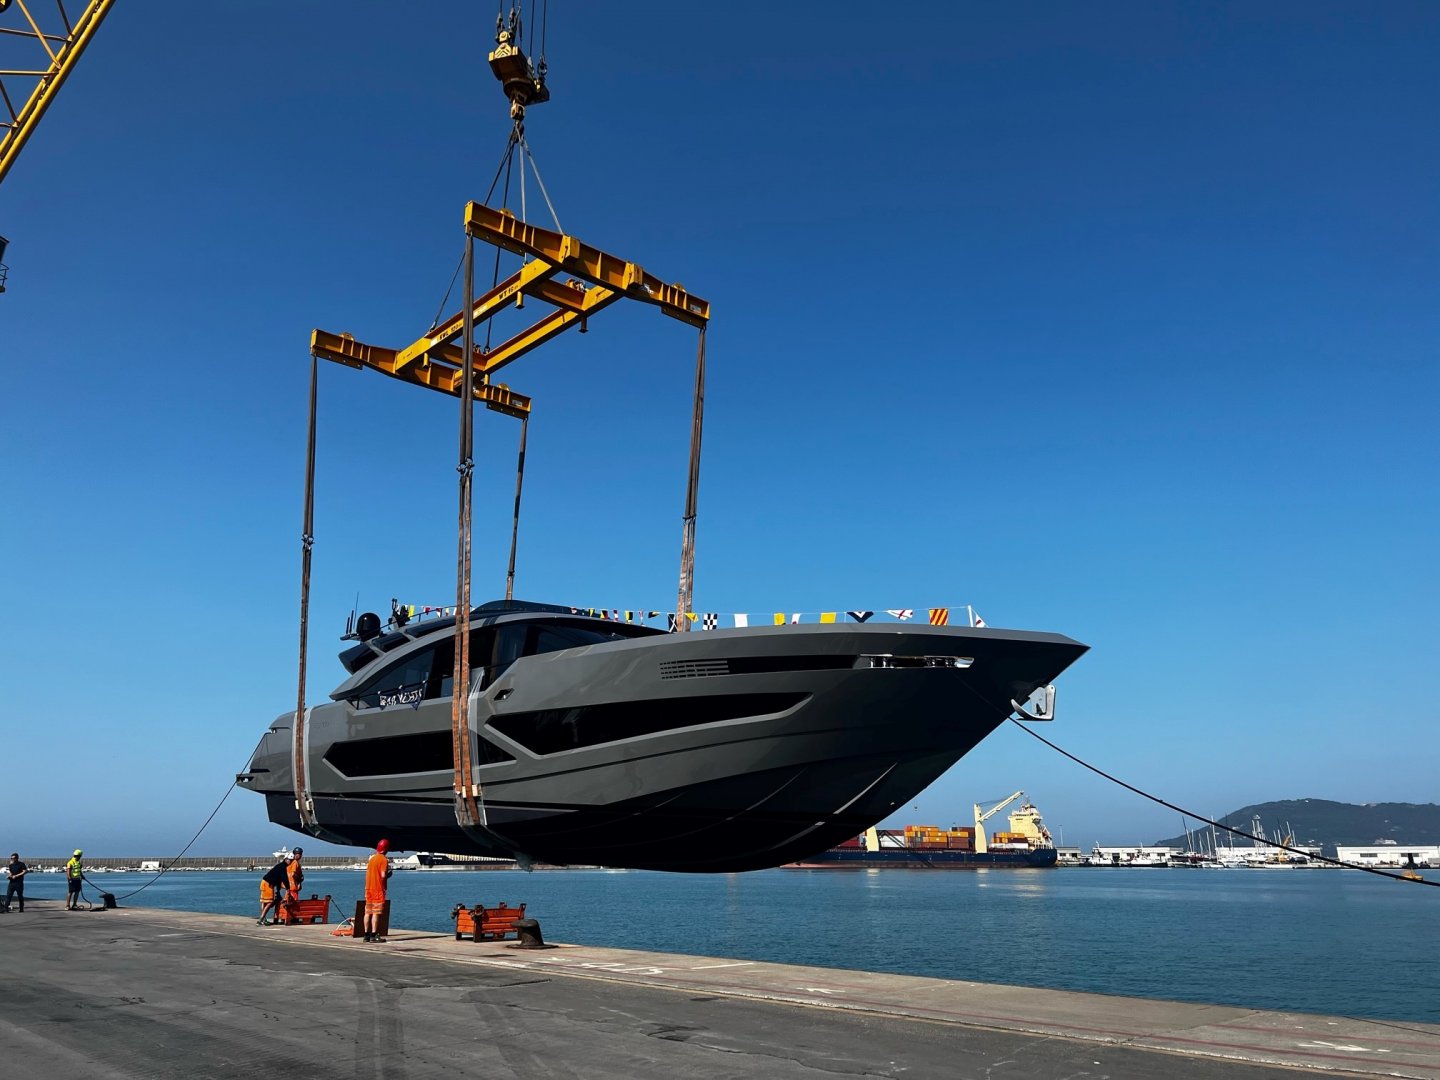 A launch and a sale for AB Yachts, a Next Yacht Group brand.